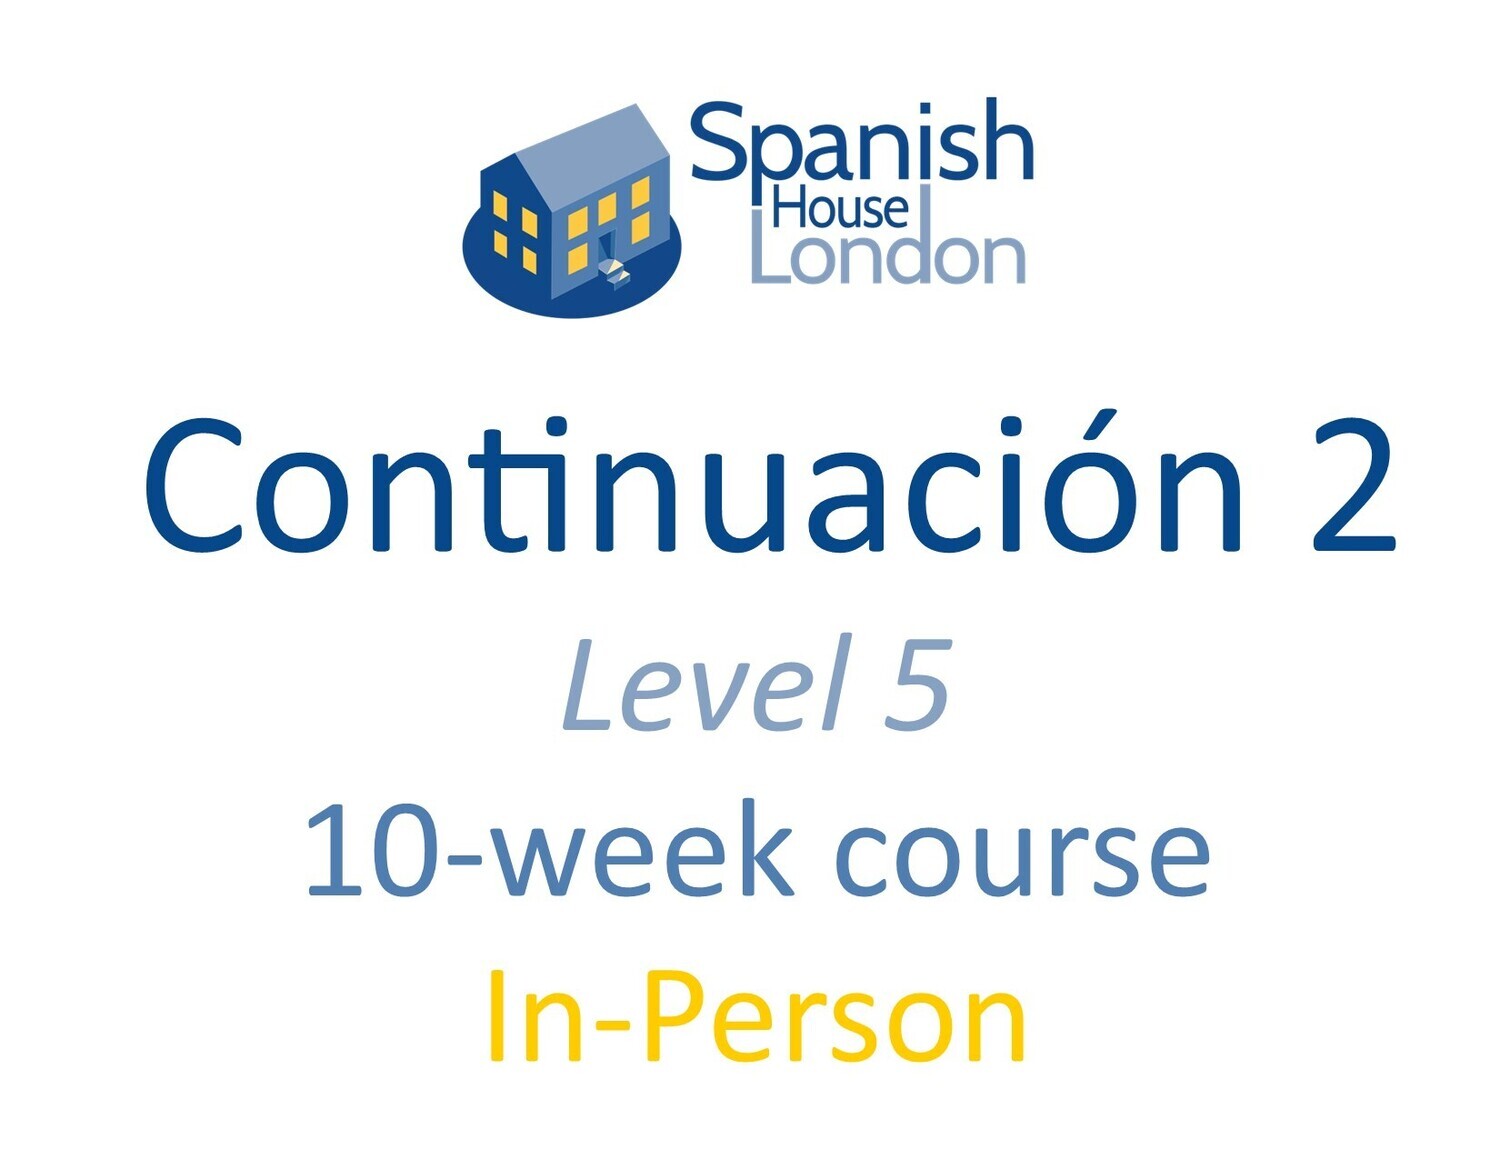 Continuacion 2 Course starting on 7th September at 6pm in Euston / King's Cross